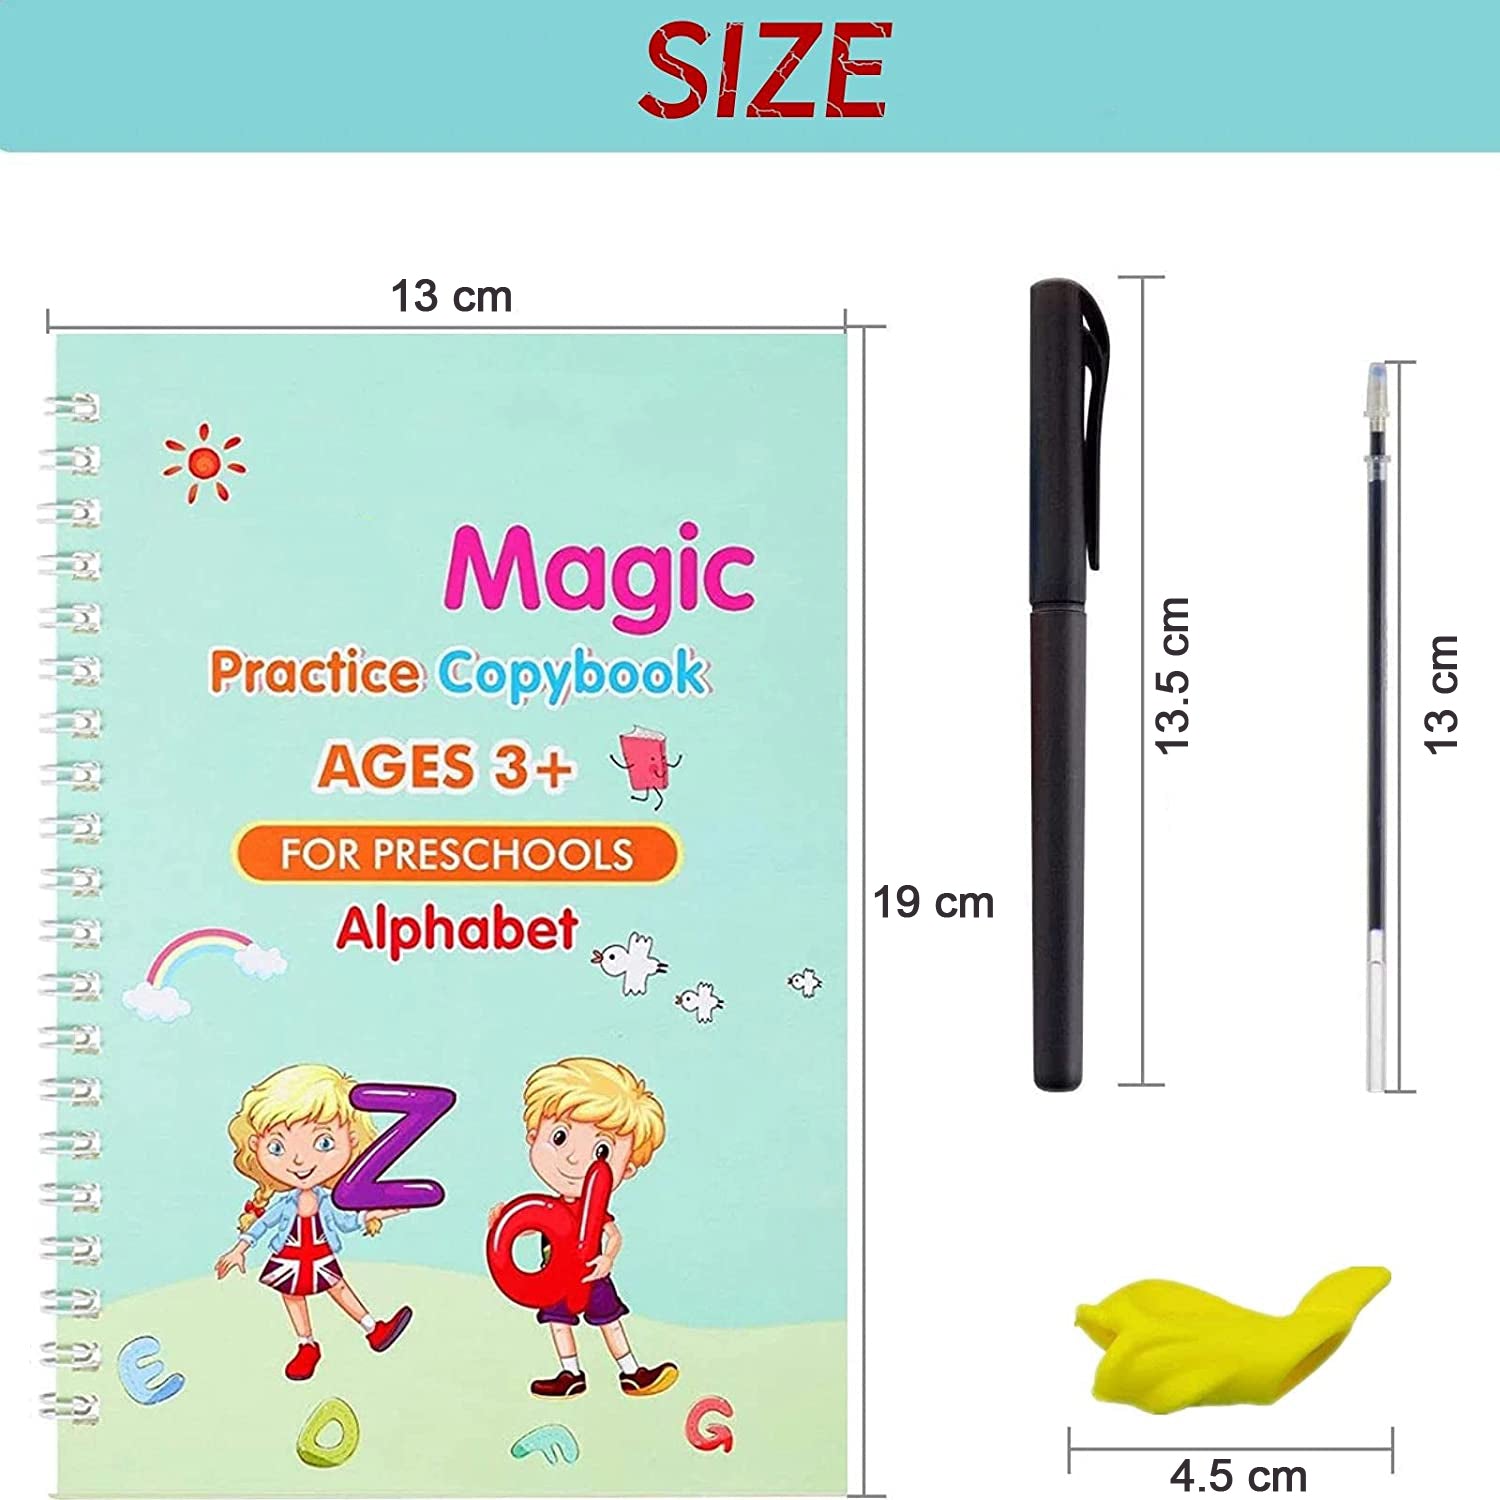 8075 4 Pc Magic Copybook widely used by kids, childrenâ€™s and even adults also to write down important things over it while emergencies etc. DeoDap